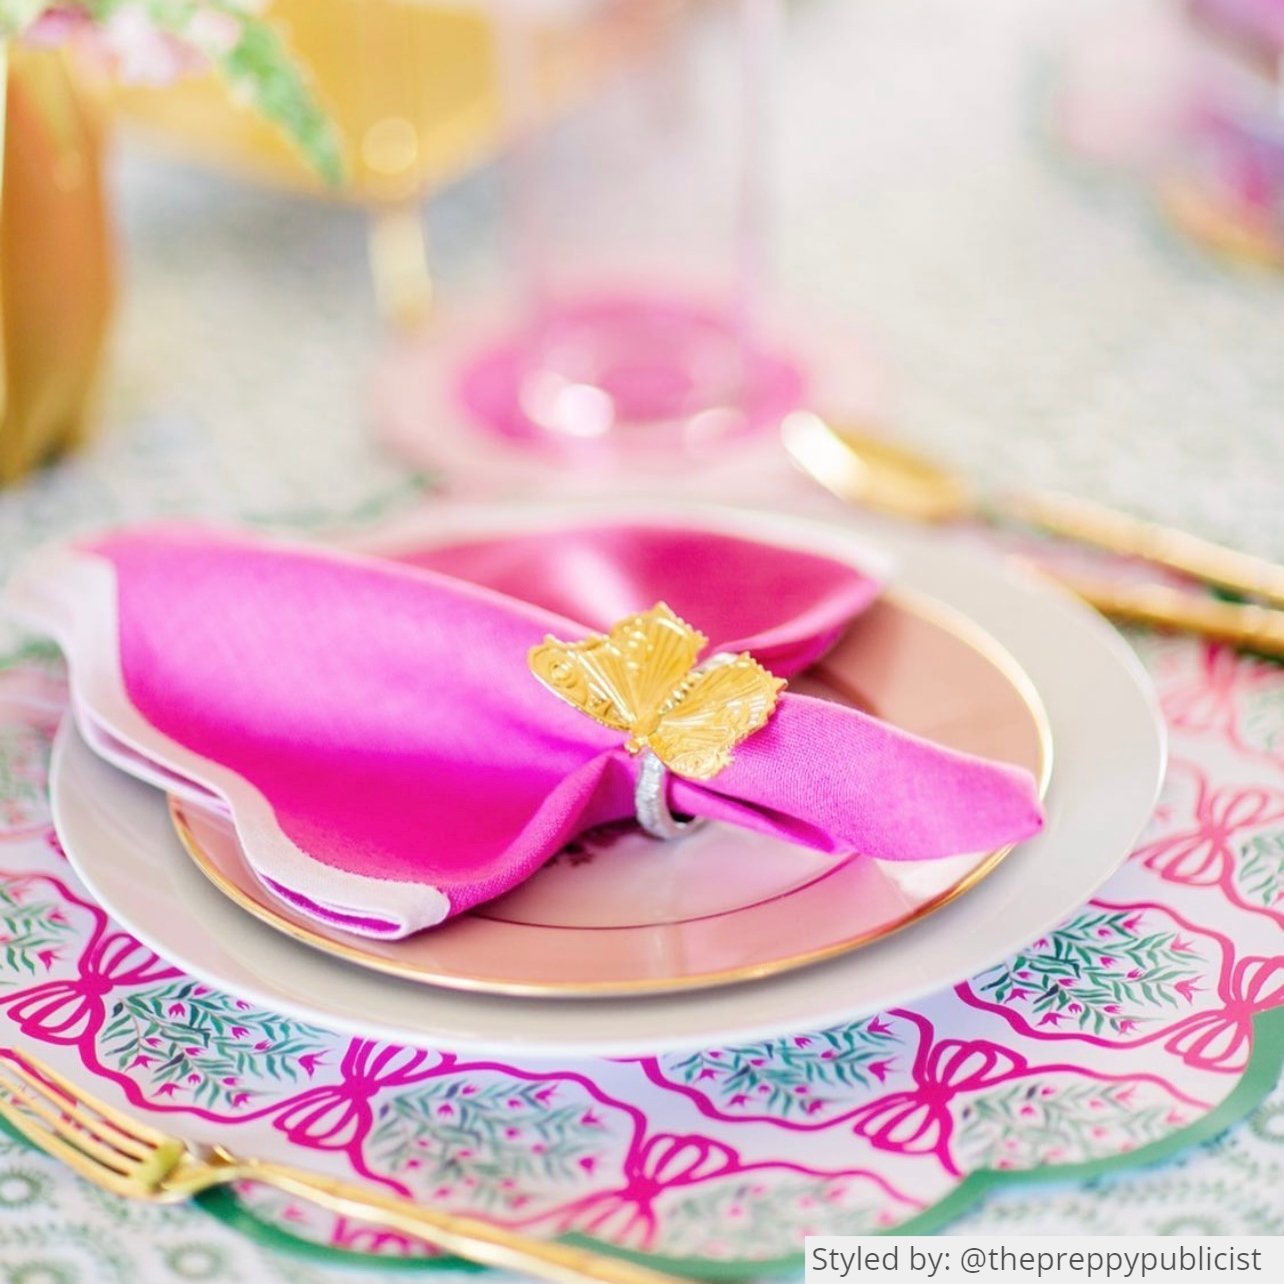 Place setting with pink and green scalloped round paper placemats layered with white and gold plates and a pink napkin tied with a gold butterfly